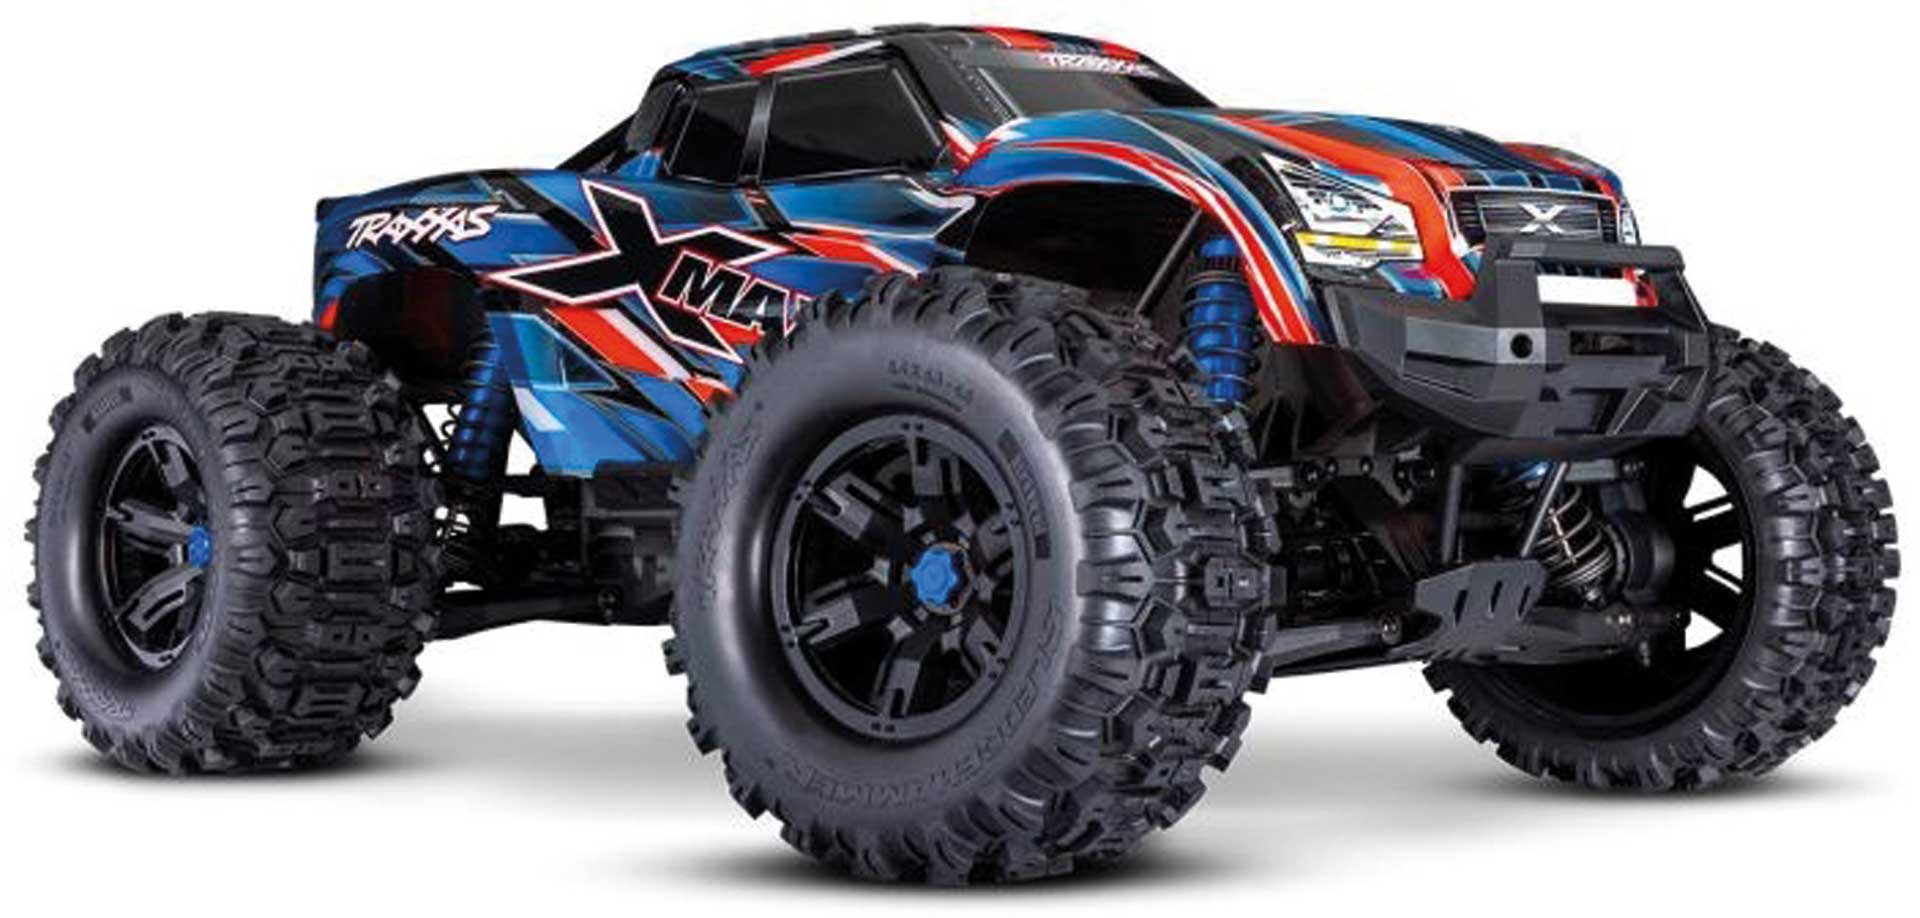 TRAXXAS X-MAXX 4X4 VXL 8S BLEU 1/7 MONSTER-TRUCK BELTED RTR BRUSHLESS SANS ACCU NI CHARGEUR